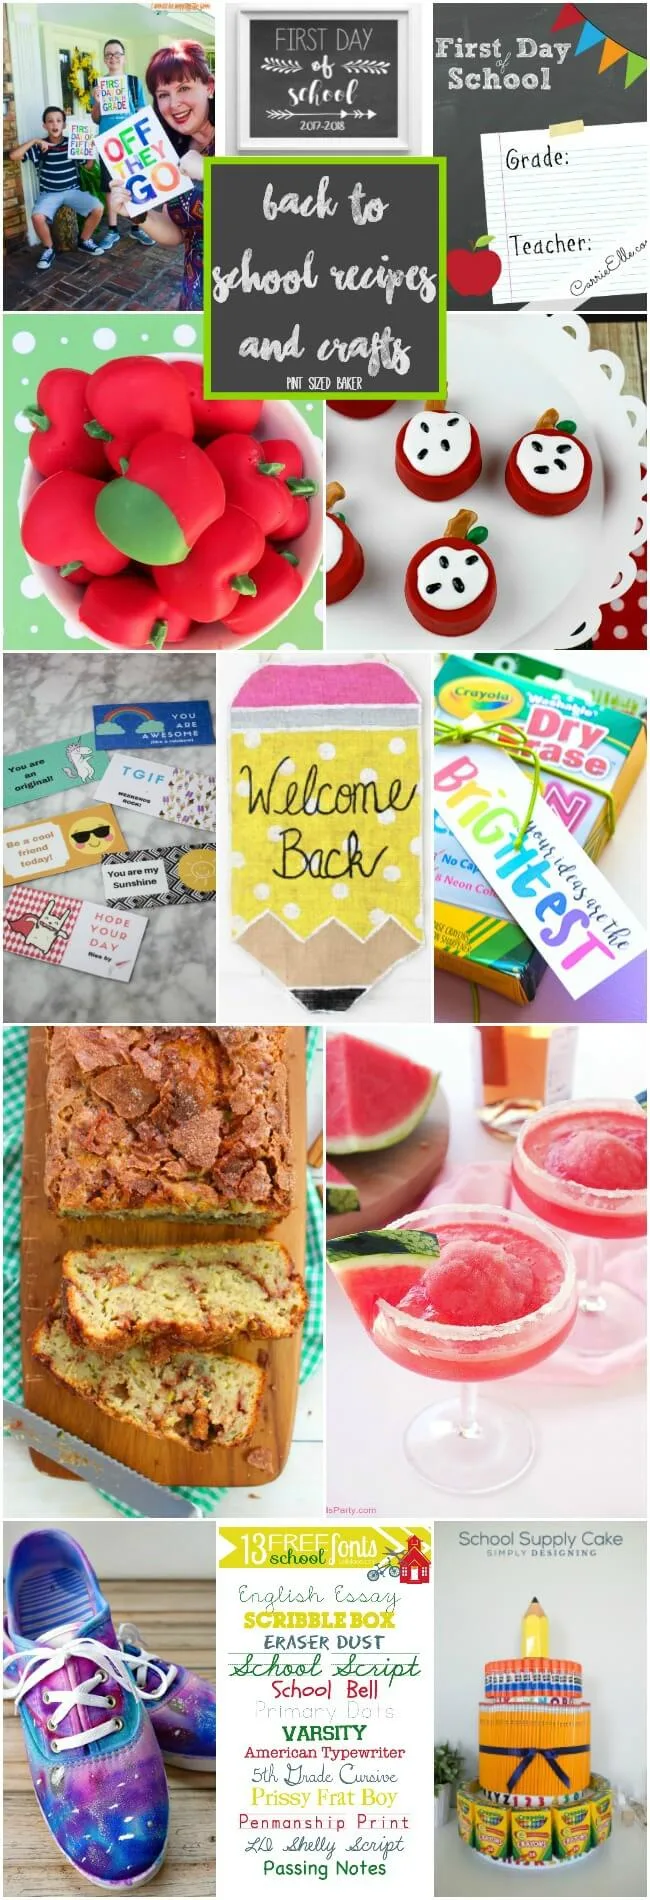 Start planing your back to school recipes and crafts. Here's a few printables, fun treats, easy DIY's and of course a cocktail for mama at the end of the hectic day.